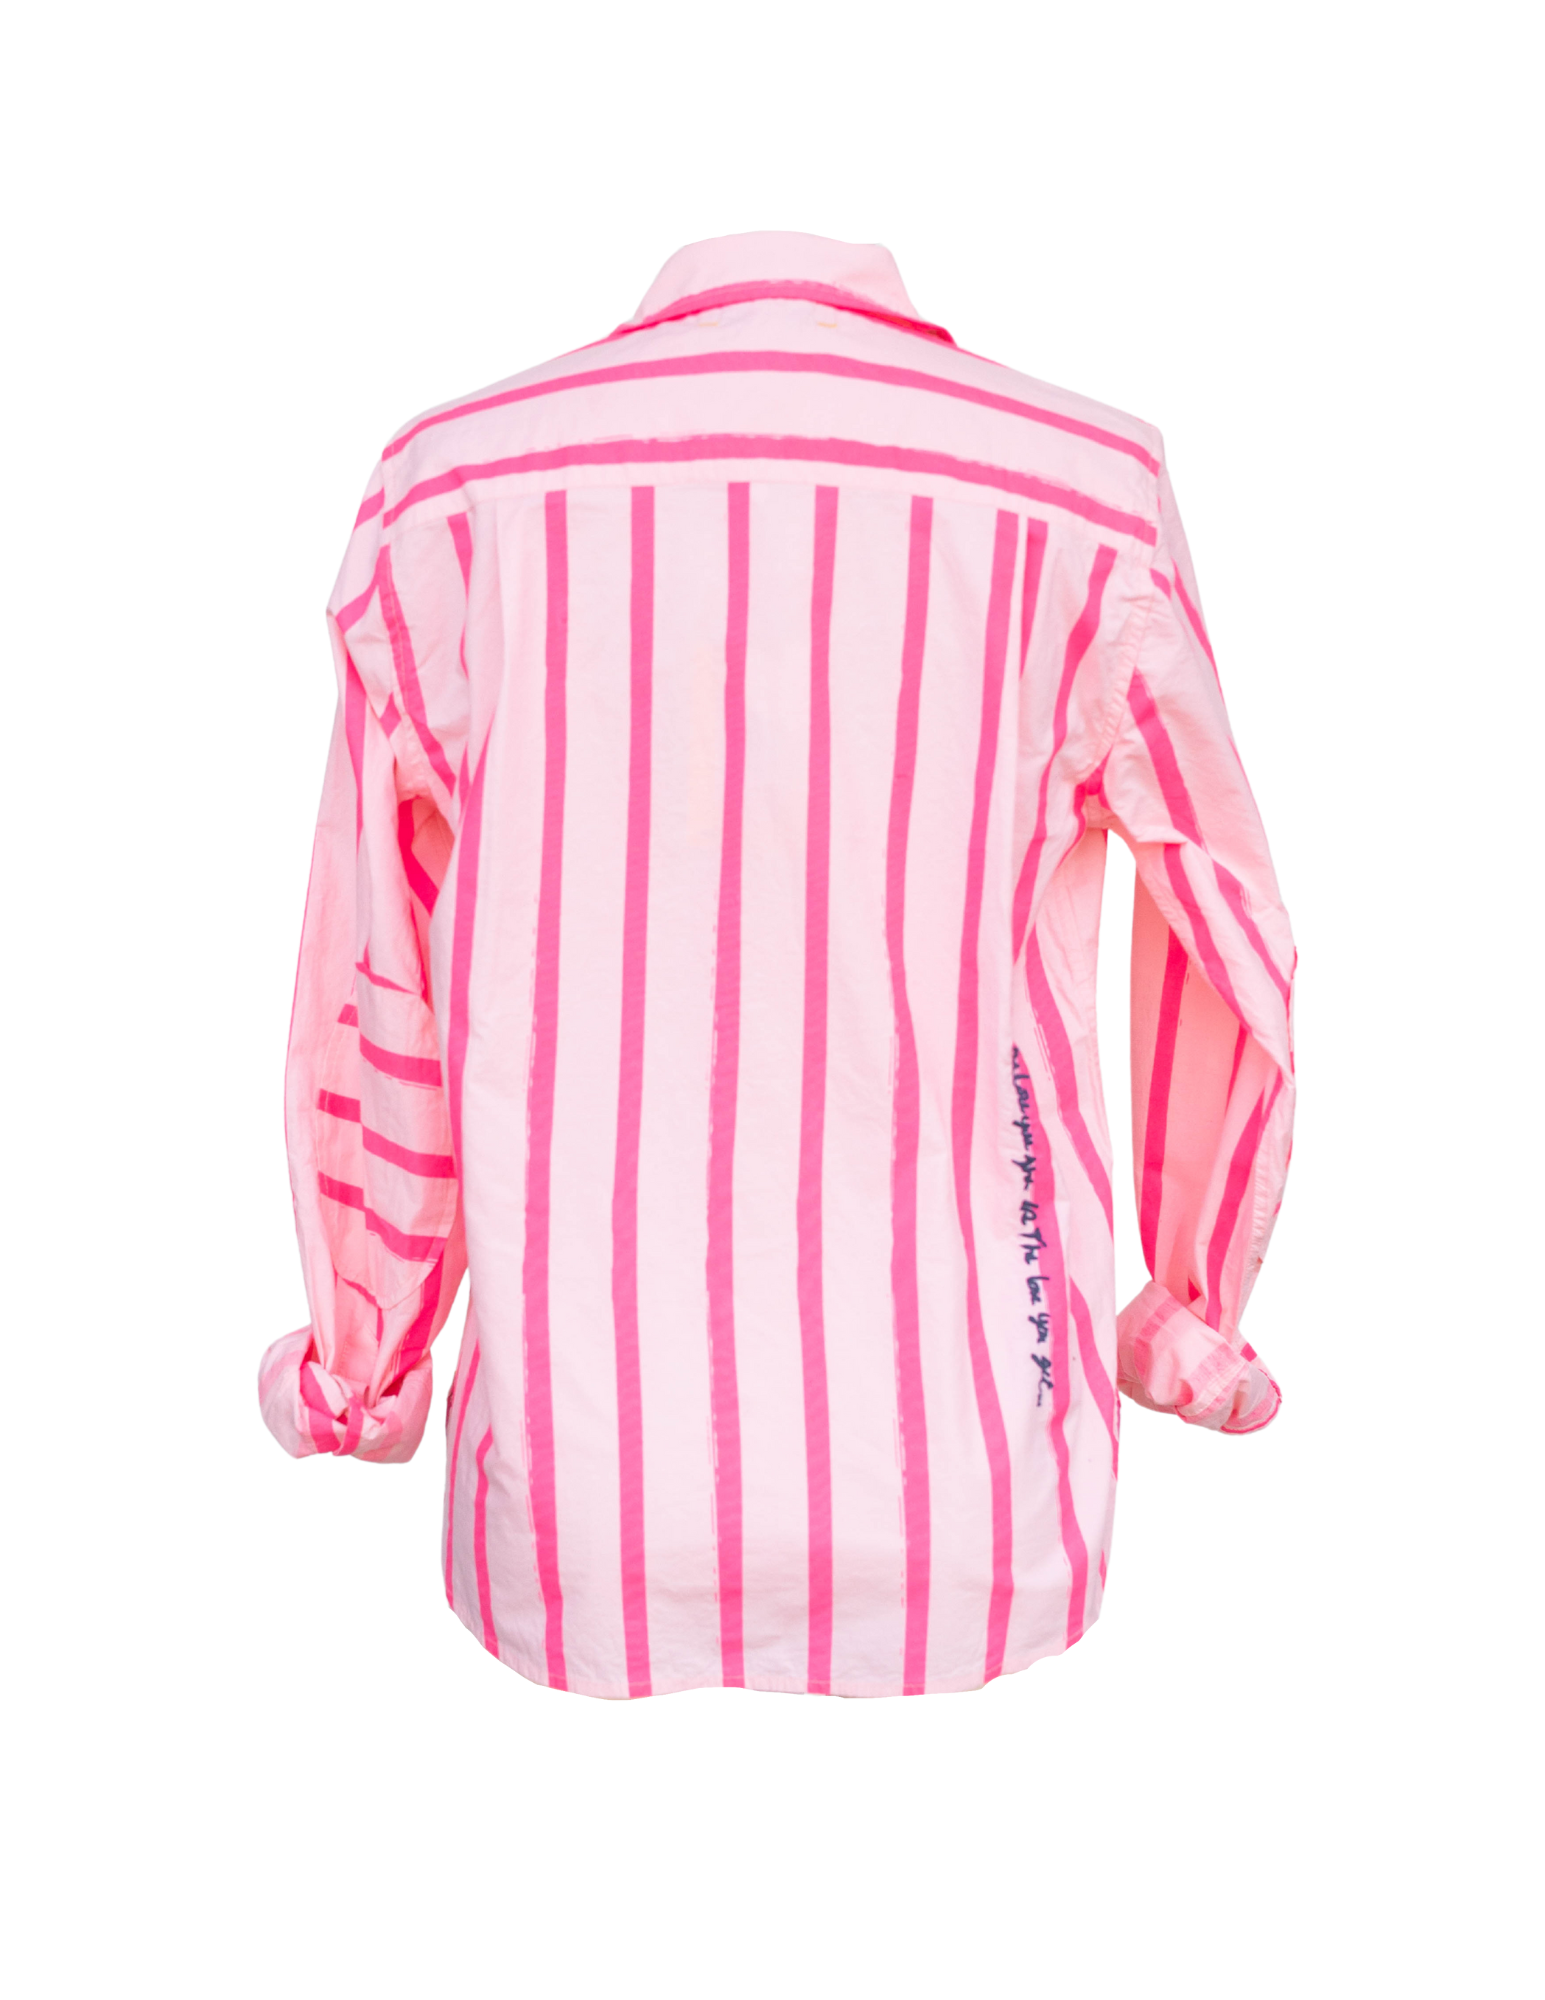 Pia Wide Stripe Shirt - Icy Pink